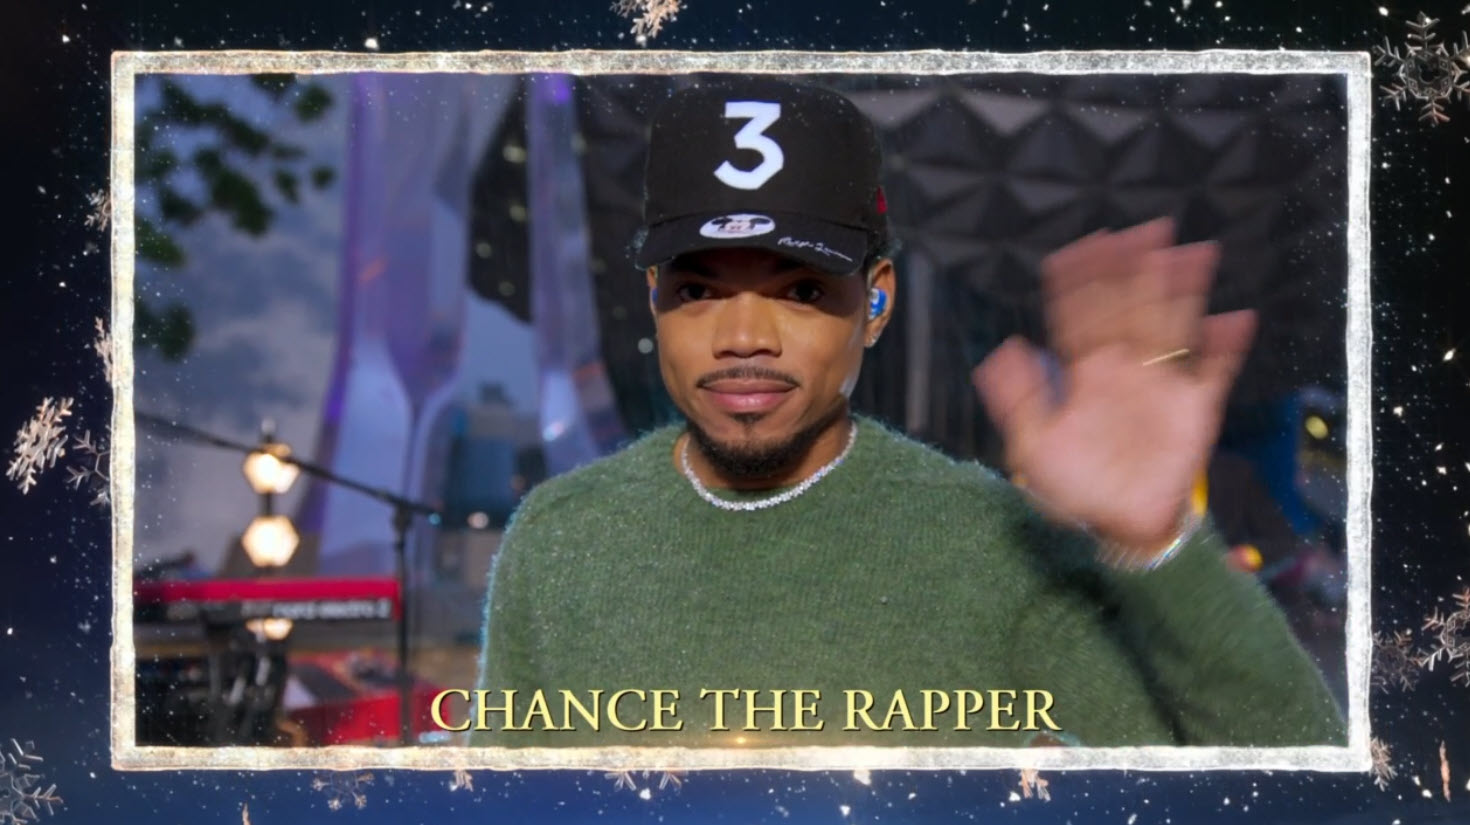 2021 Disney Parks Magical Christmas Day Parade Chance the Rapper – “Who’s to Say”